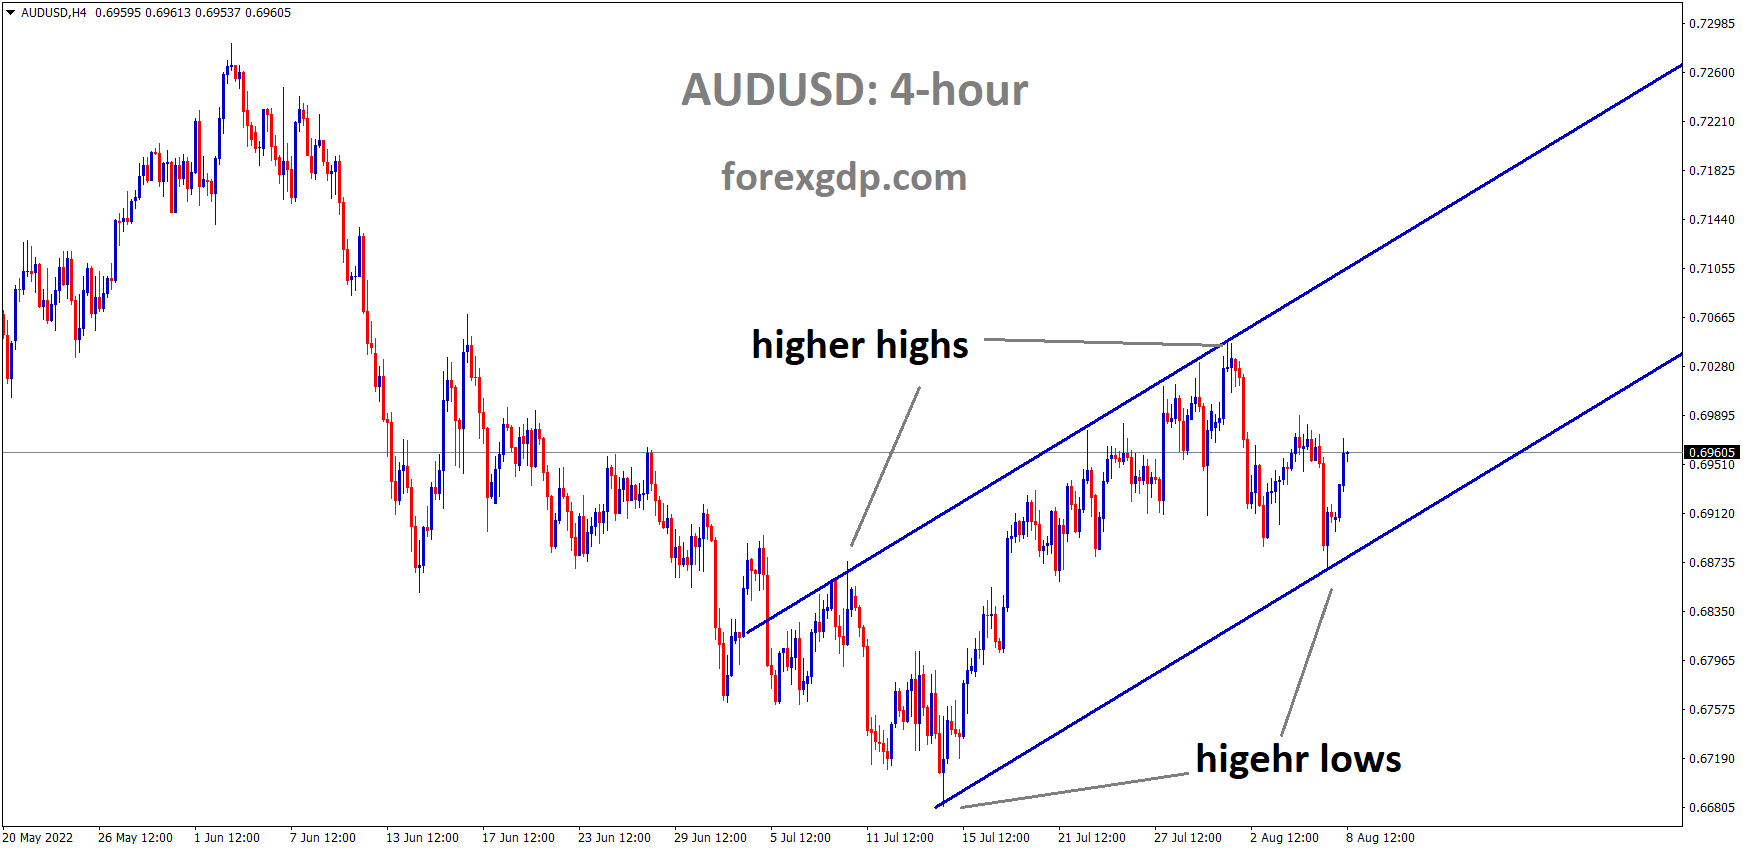 AUDUSD is moving in an Ascending channel and the Market has rebounded from the higher low area of the channel